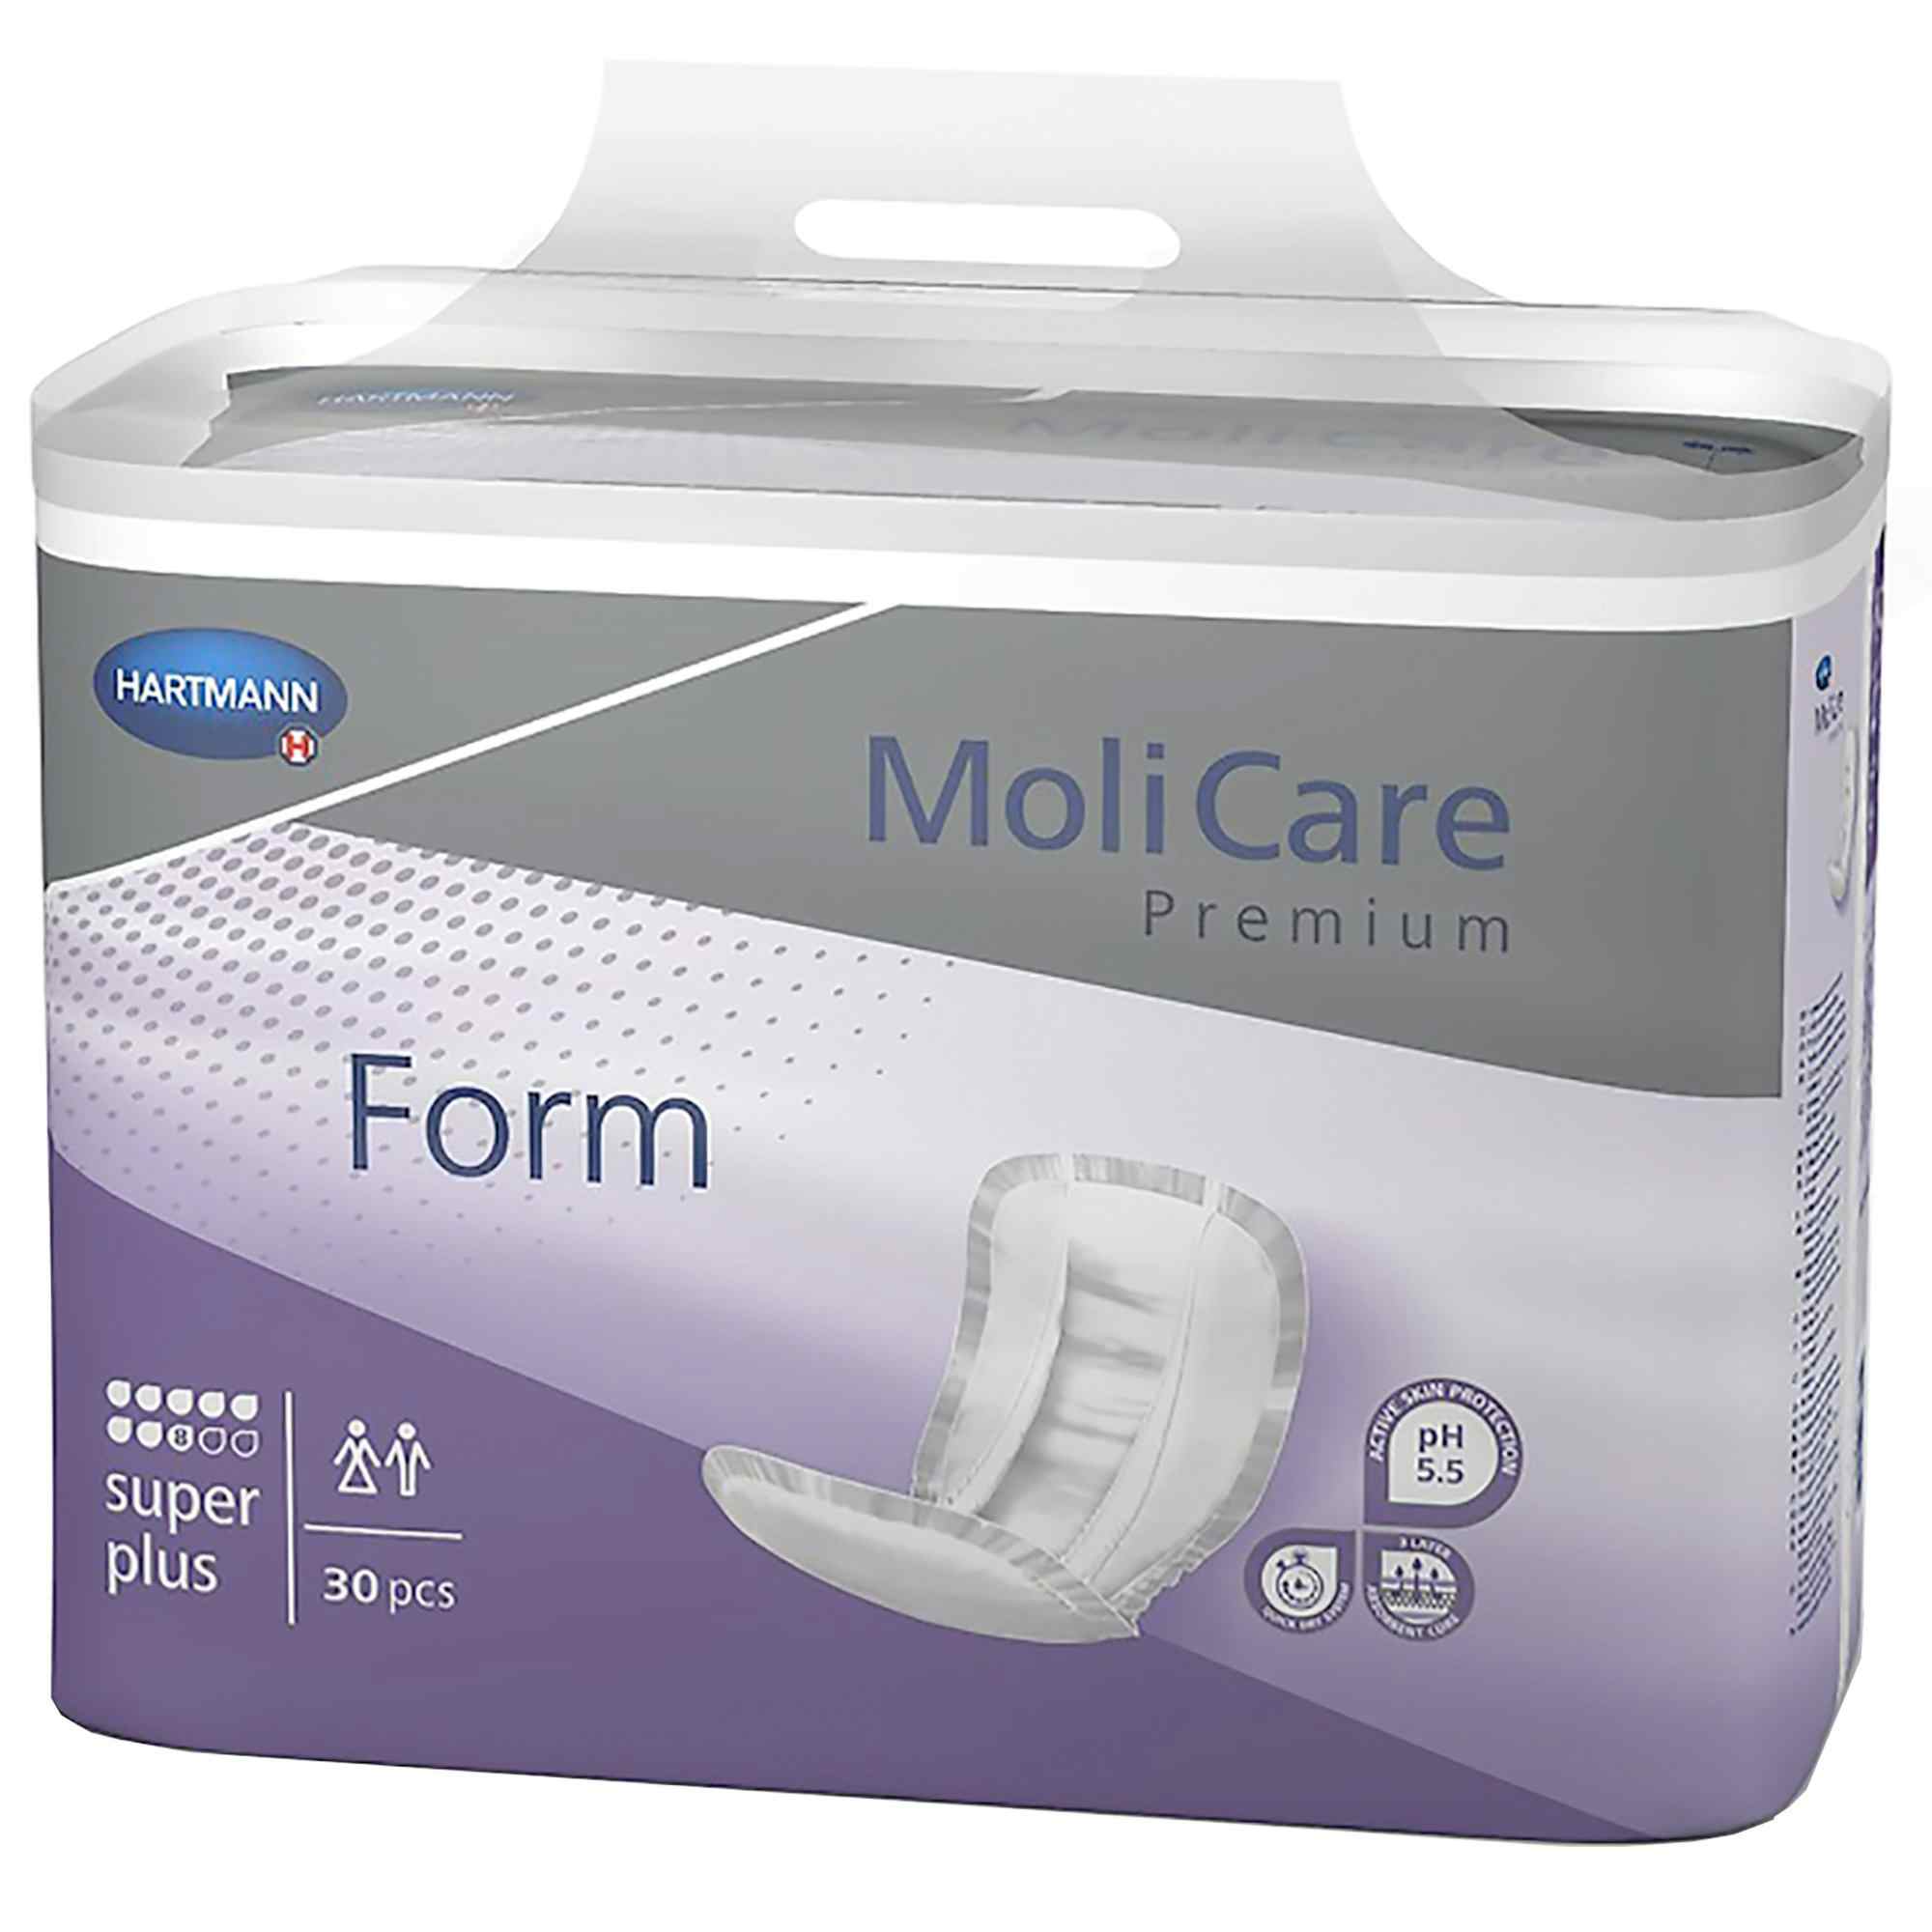 MoliCare Premium Form Super Plus Adult Disposable Bladder Control Pad, Heavy, 168919, One Size Fits Most - Bag of 30